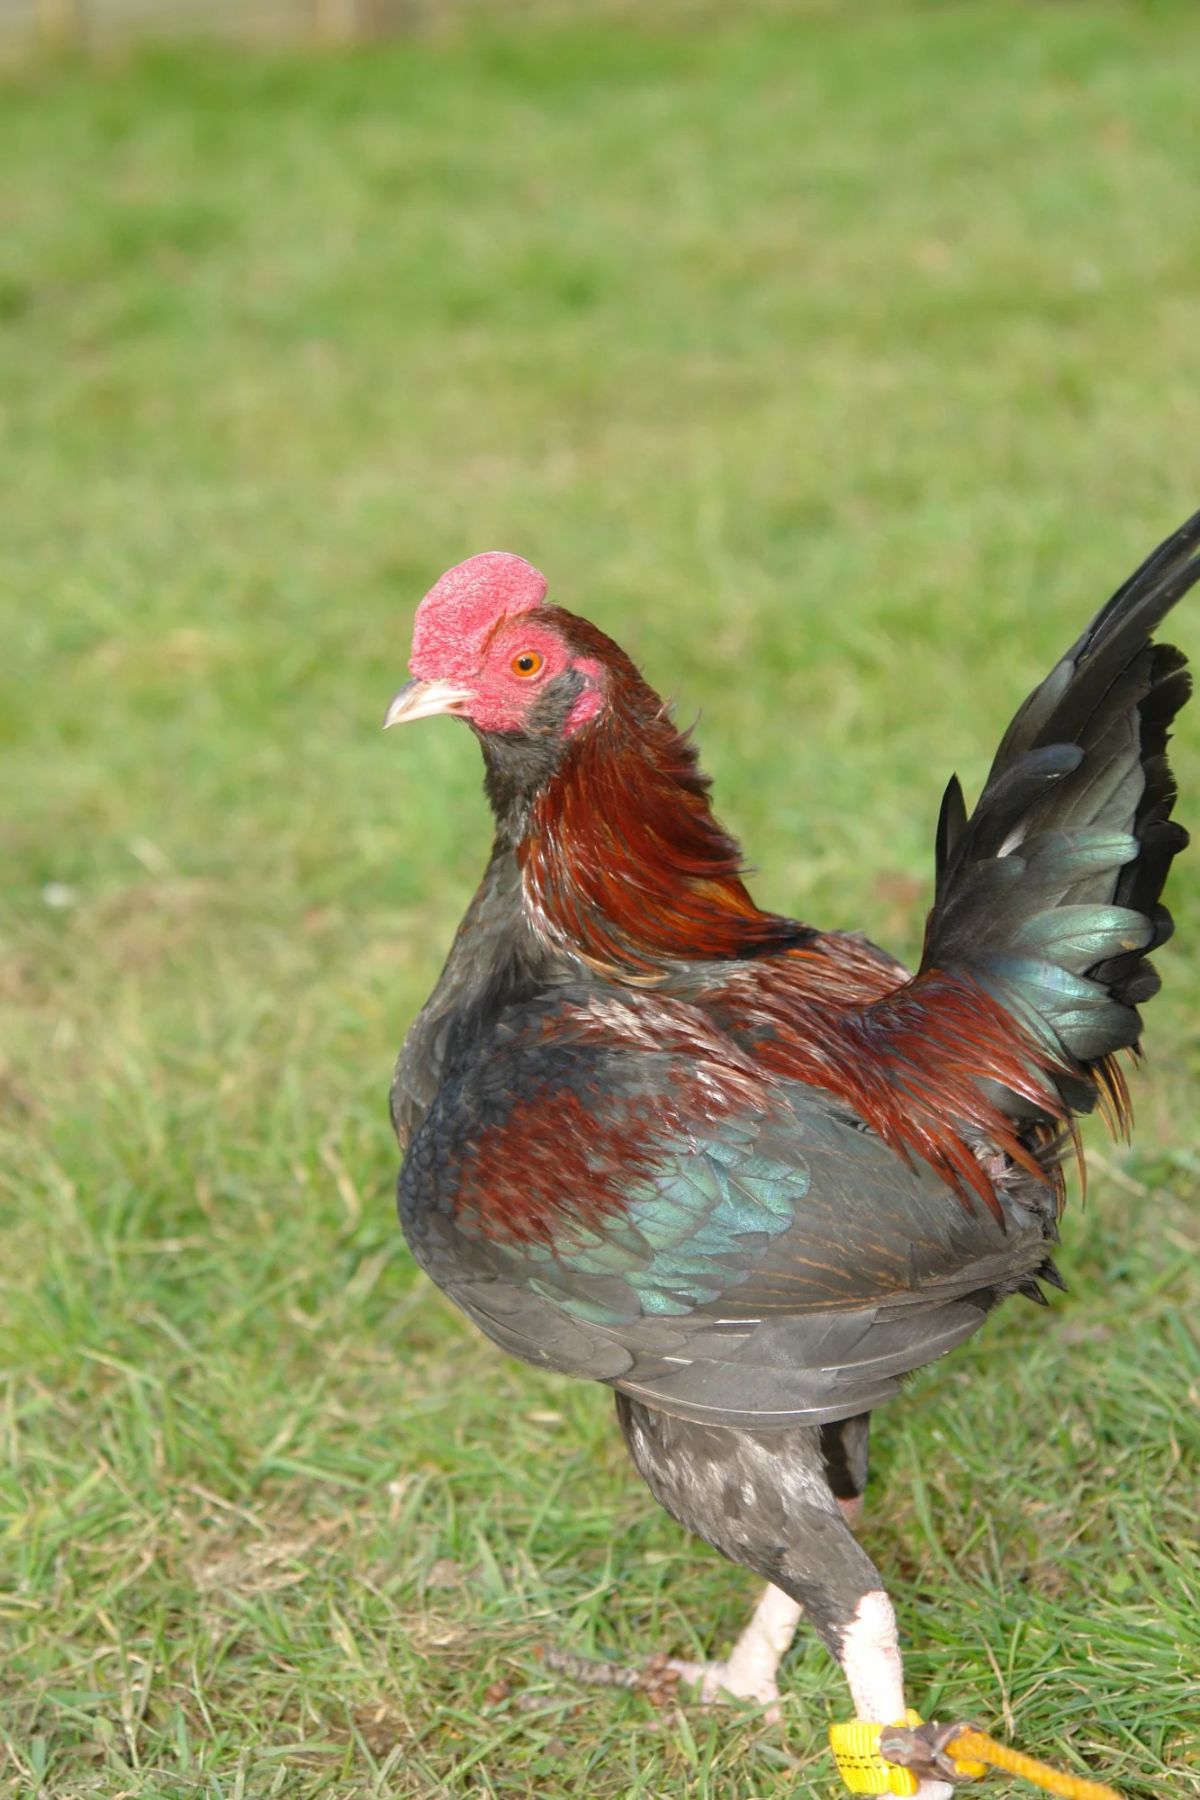 Adorable Muffed Old English Game rooster stands on green grass.